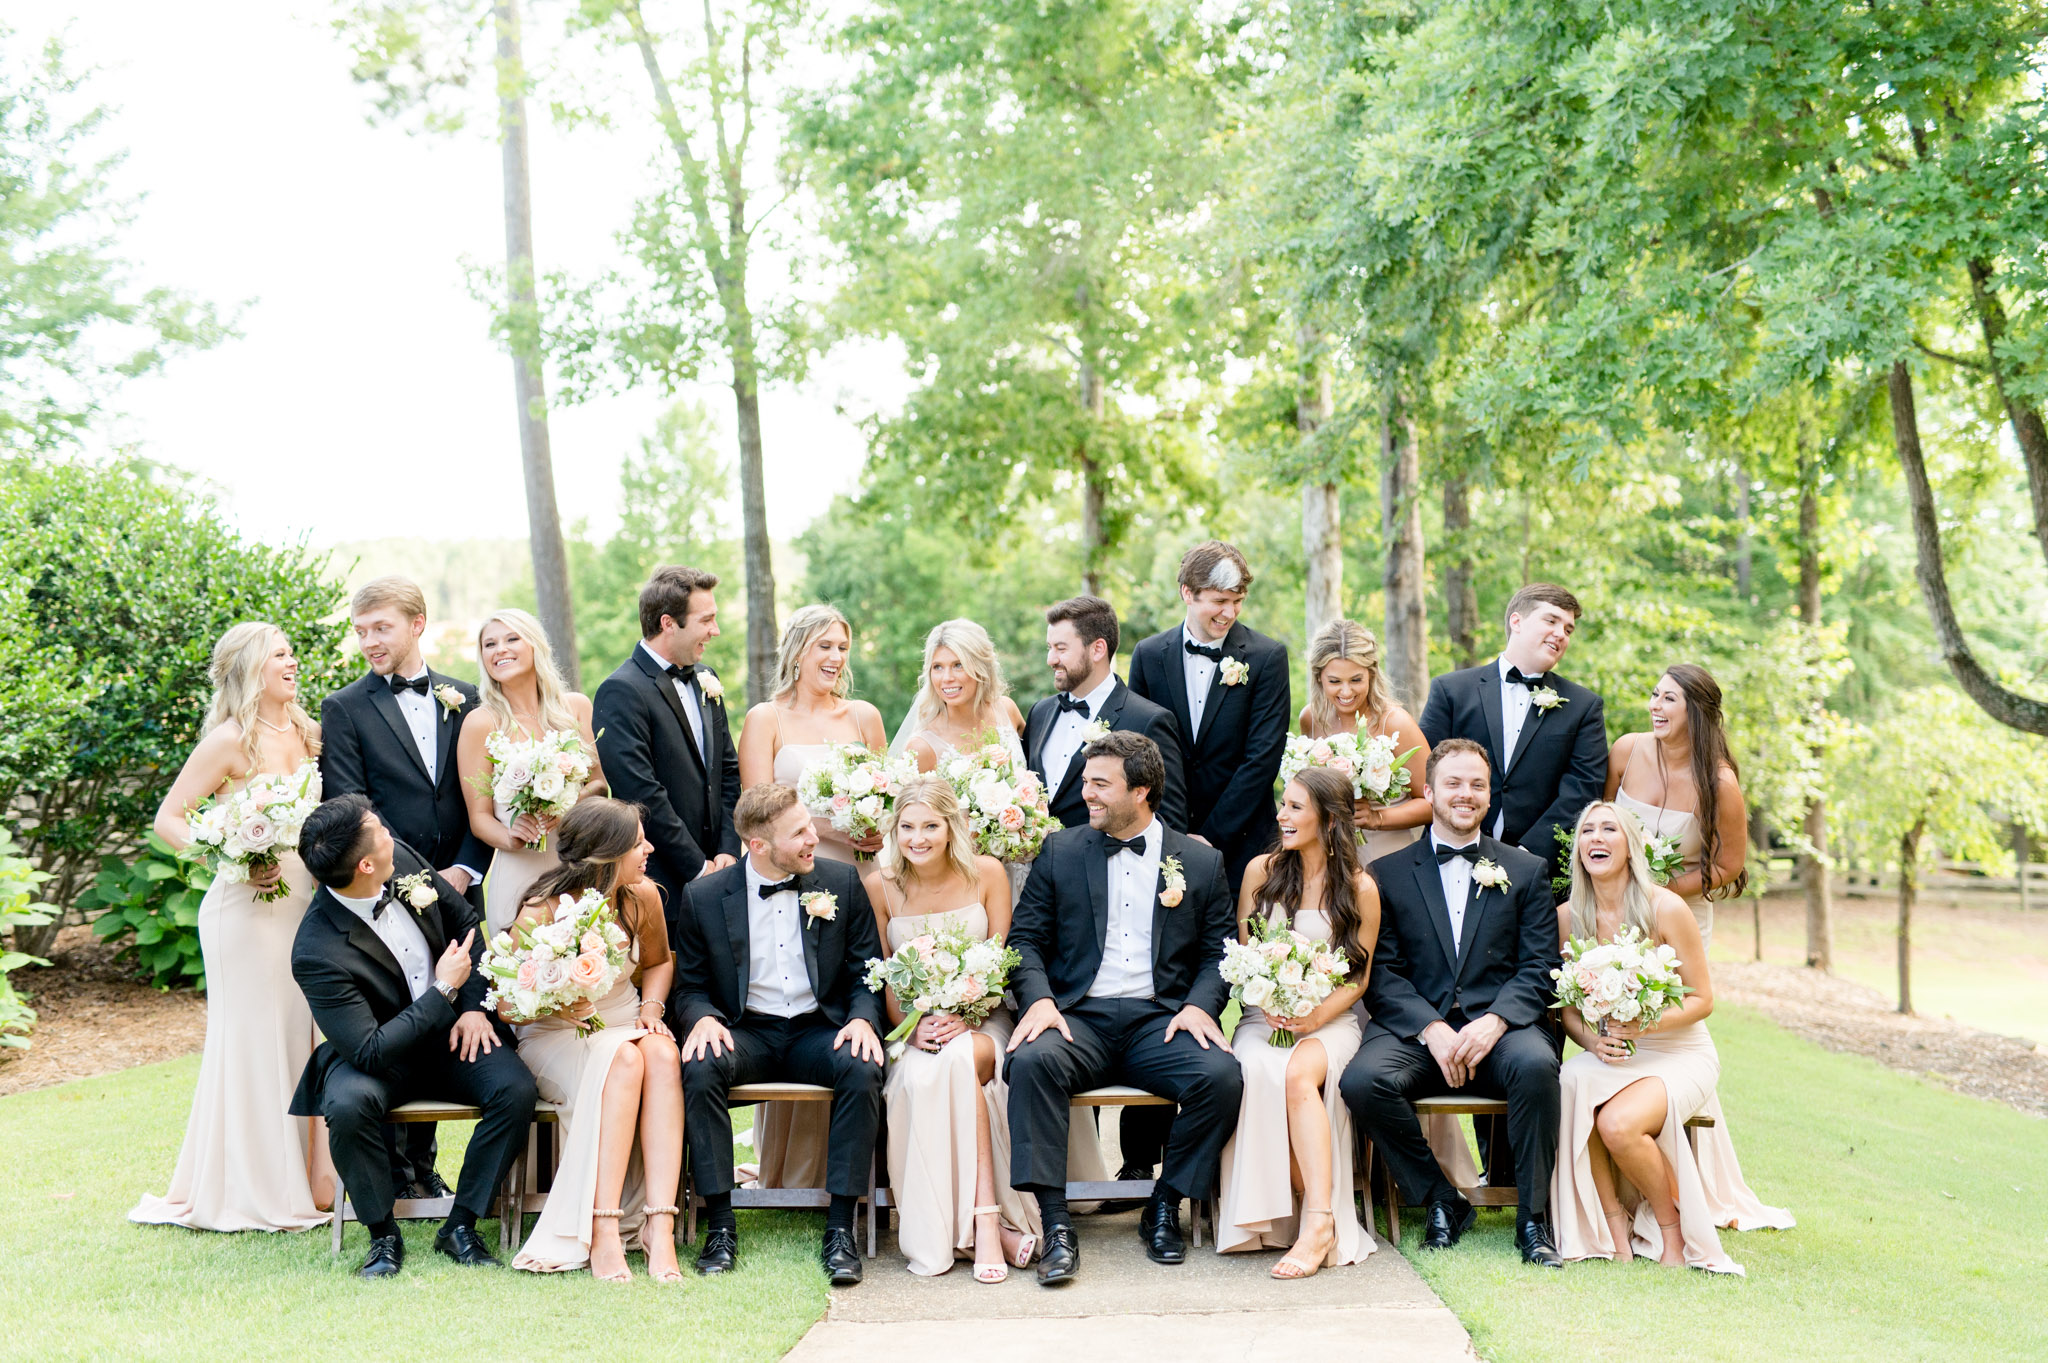 Wedding party surrounds bride and groom and laugh.